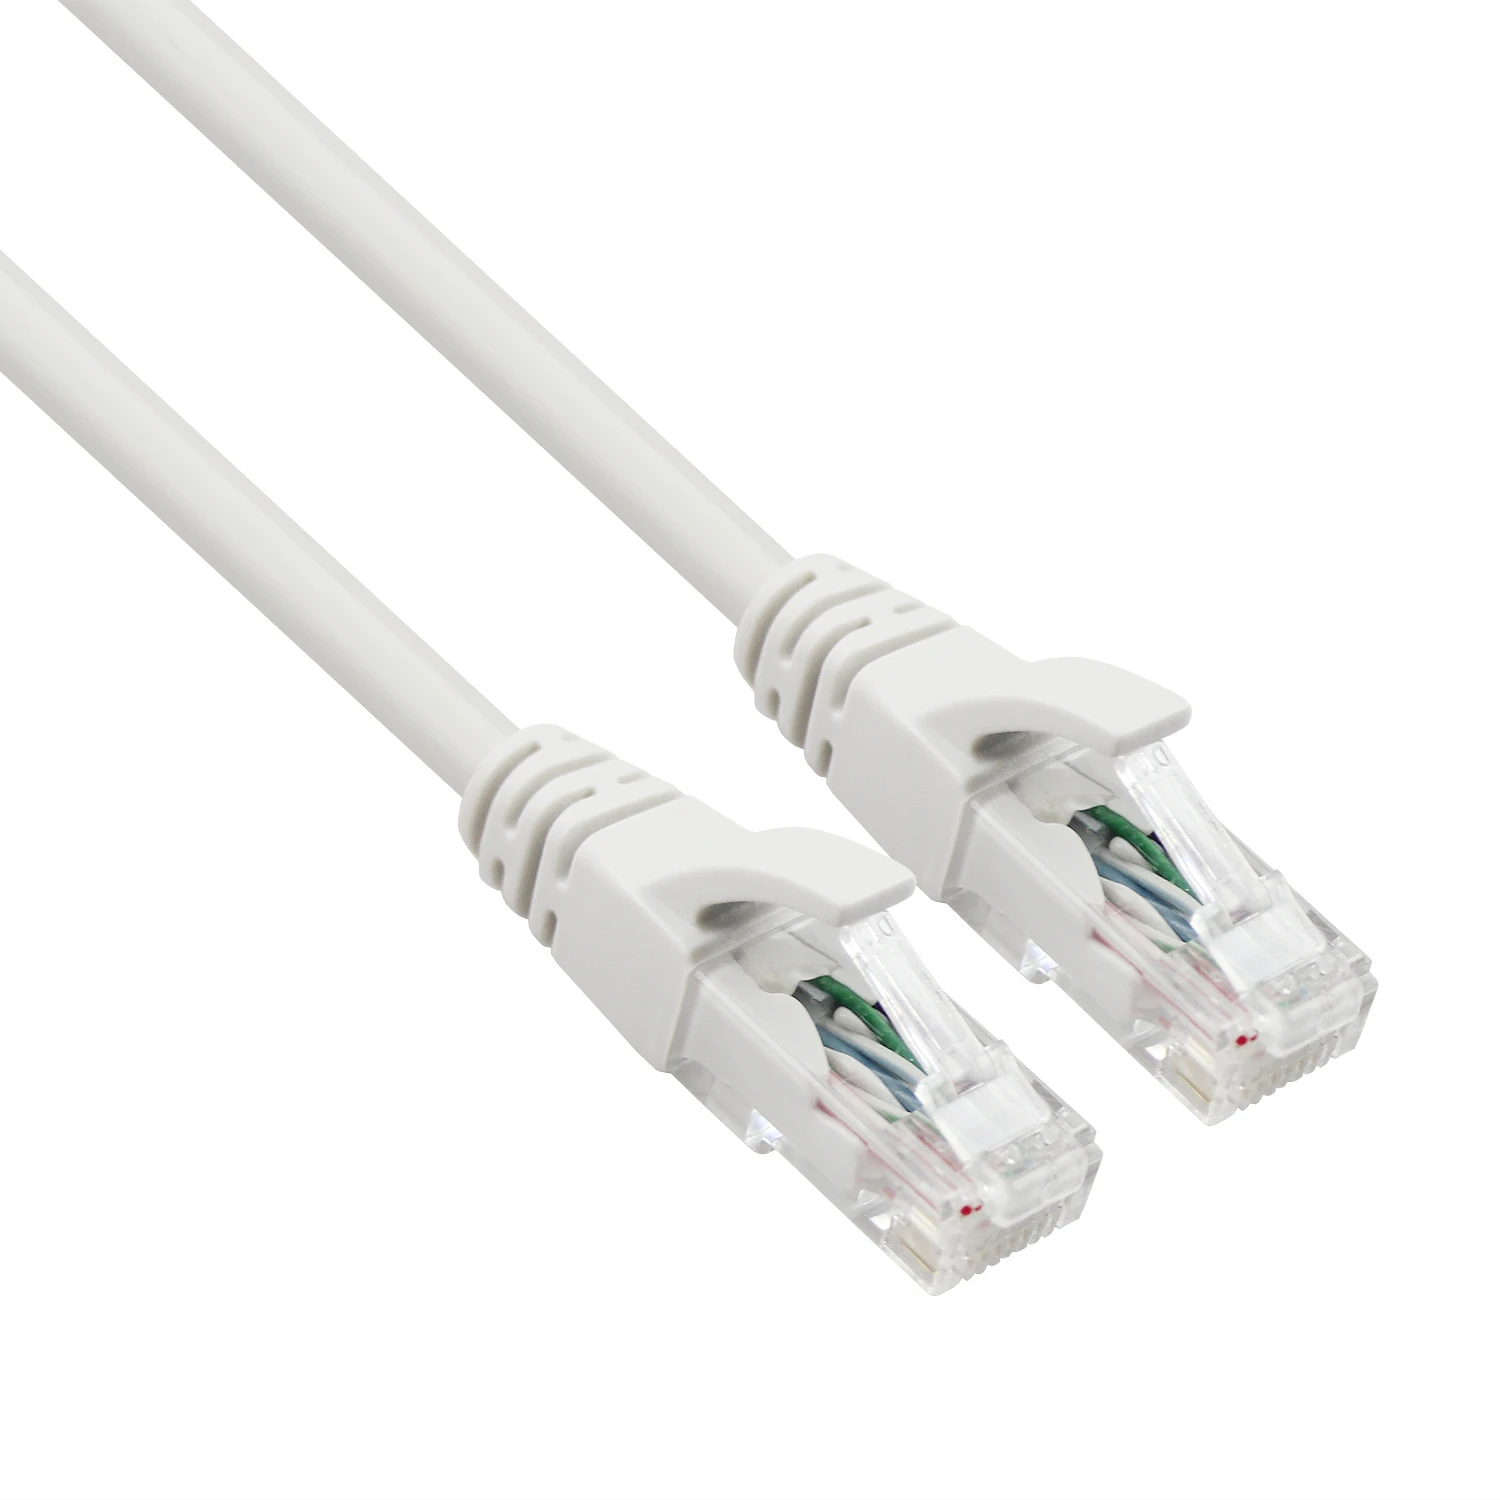 Lan Cable Cat6 1000M Ethernet Cable UTP CCA Pure Copper Cat6 Patch Cord Network Cable